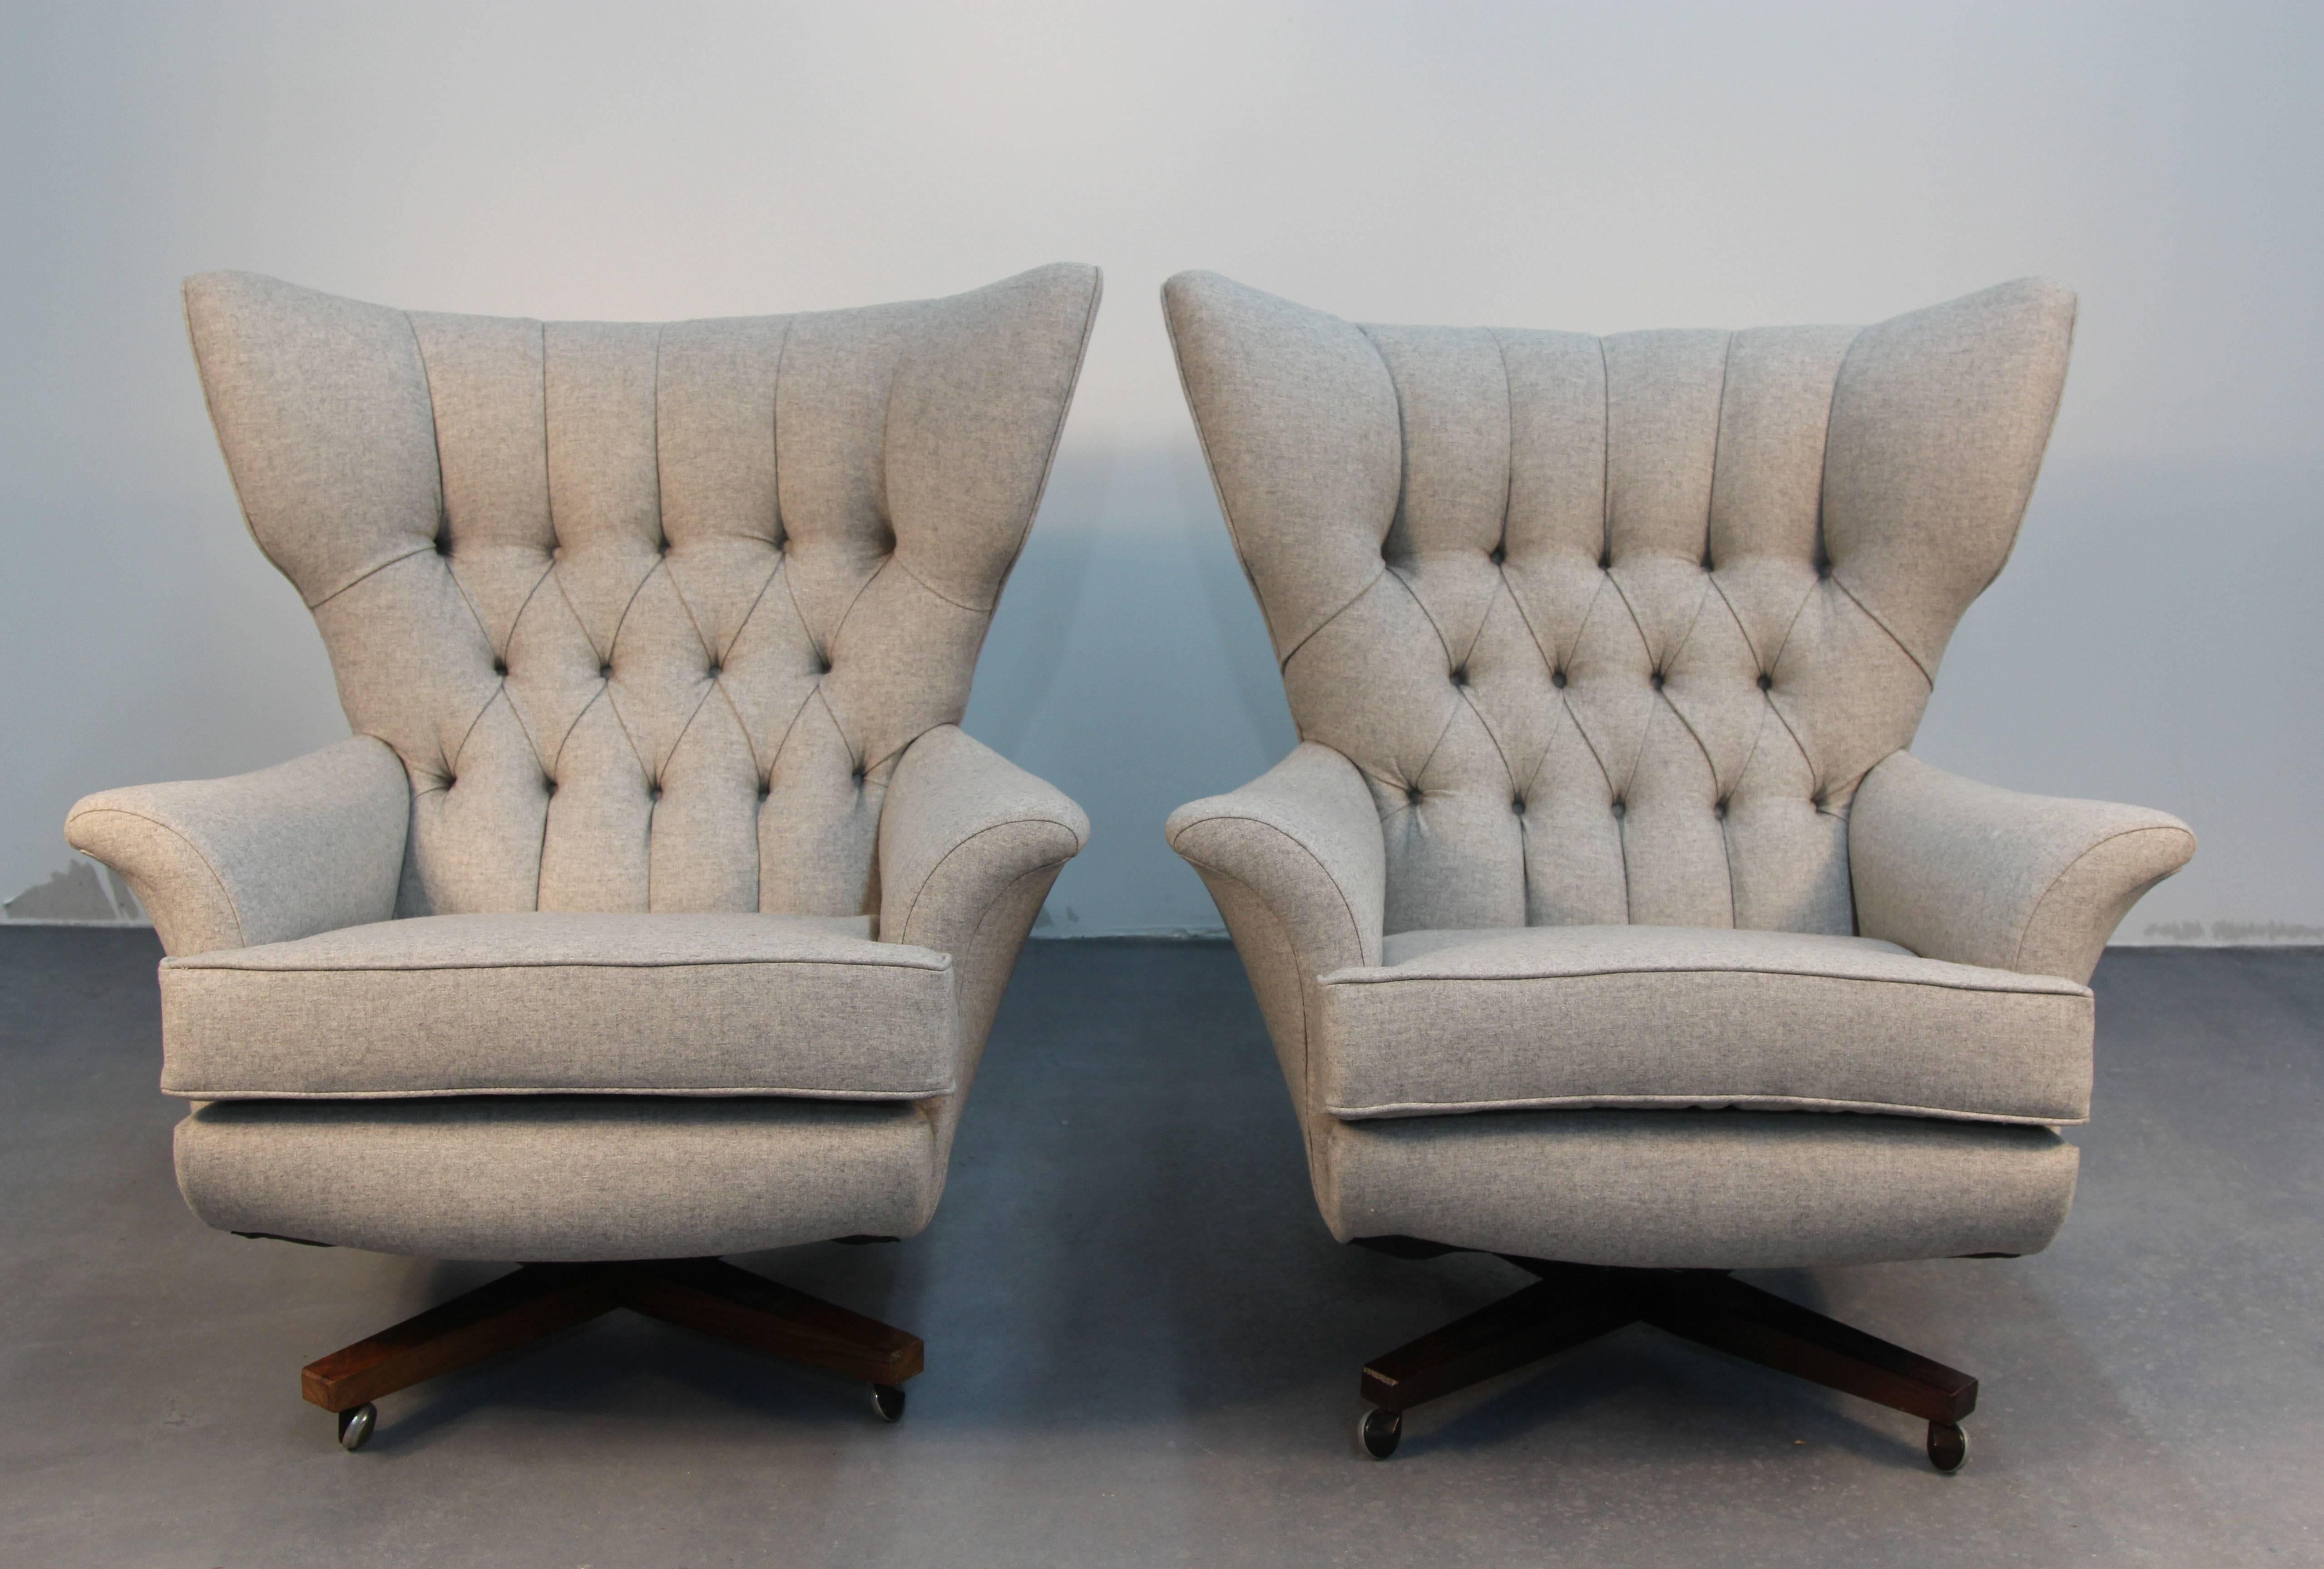 Incredible and super rare set of G-Plan Blofeld chairs and ottomans. Once dubbed "The most comfortable chair in the world" these chairs were made popular in the original James Bond movies and later in the Austin Powers spoof with Dr. Evil.